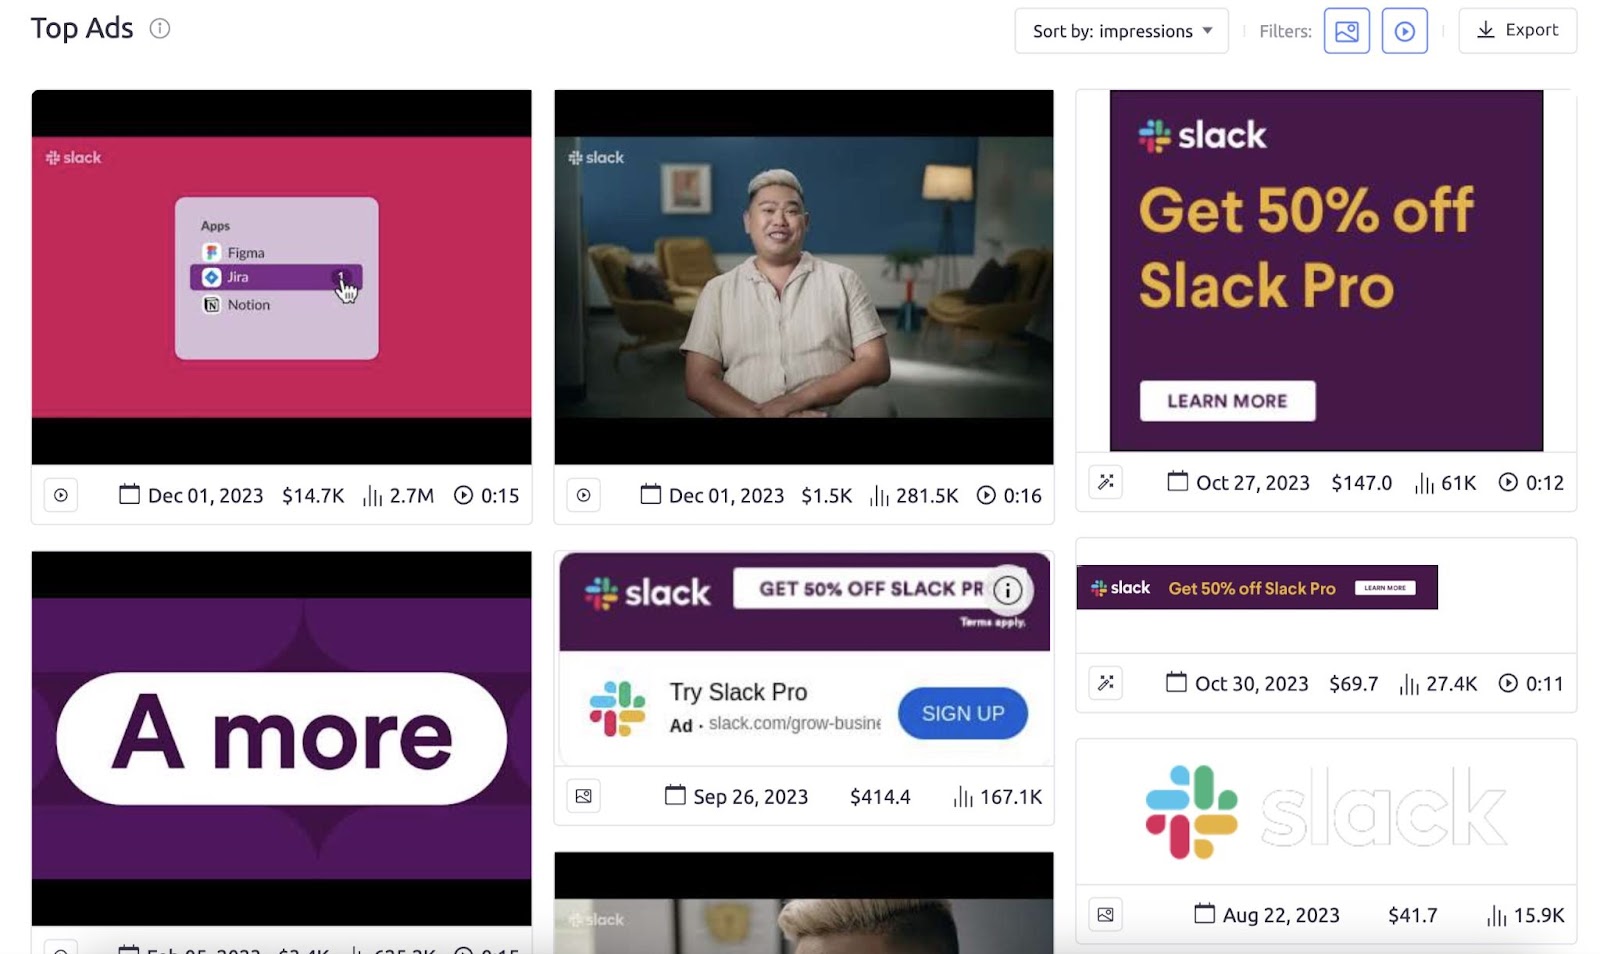 "Top Ads" section for Slack in AdClarity